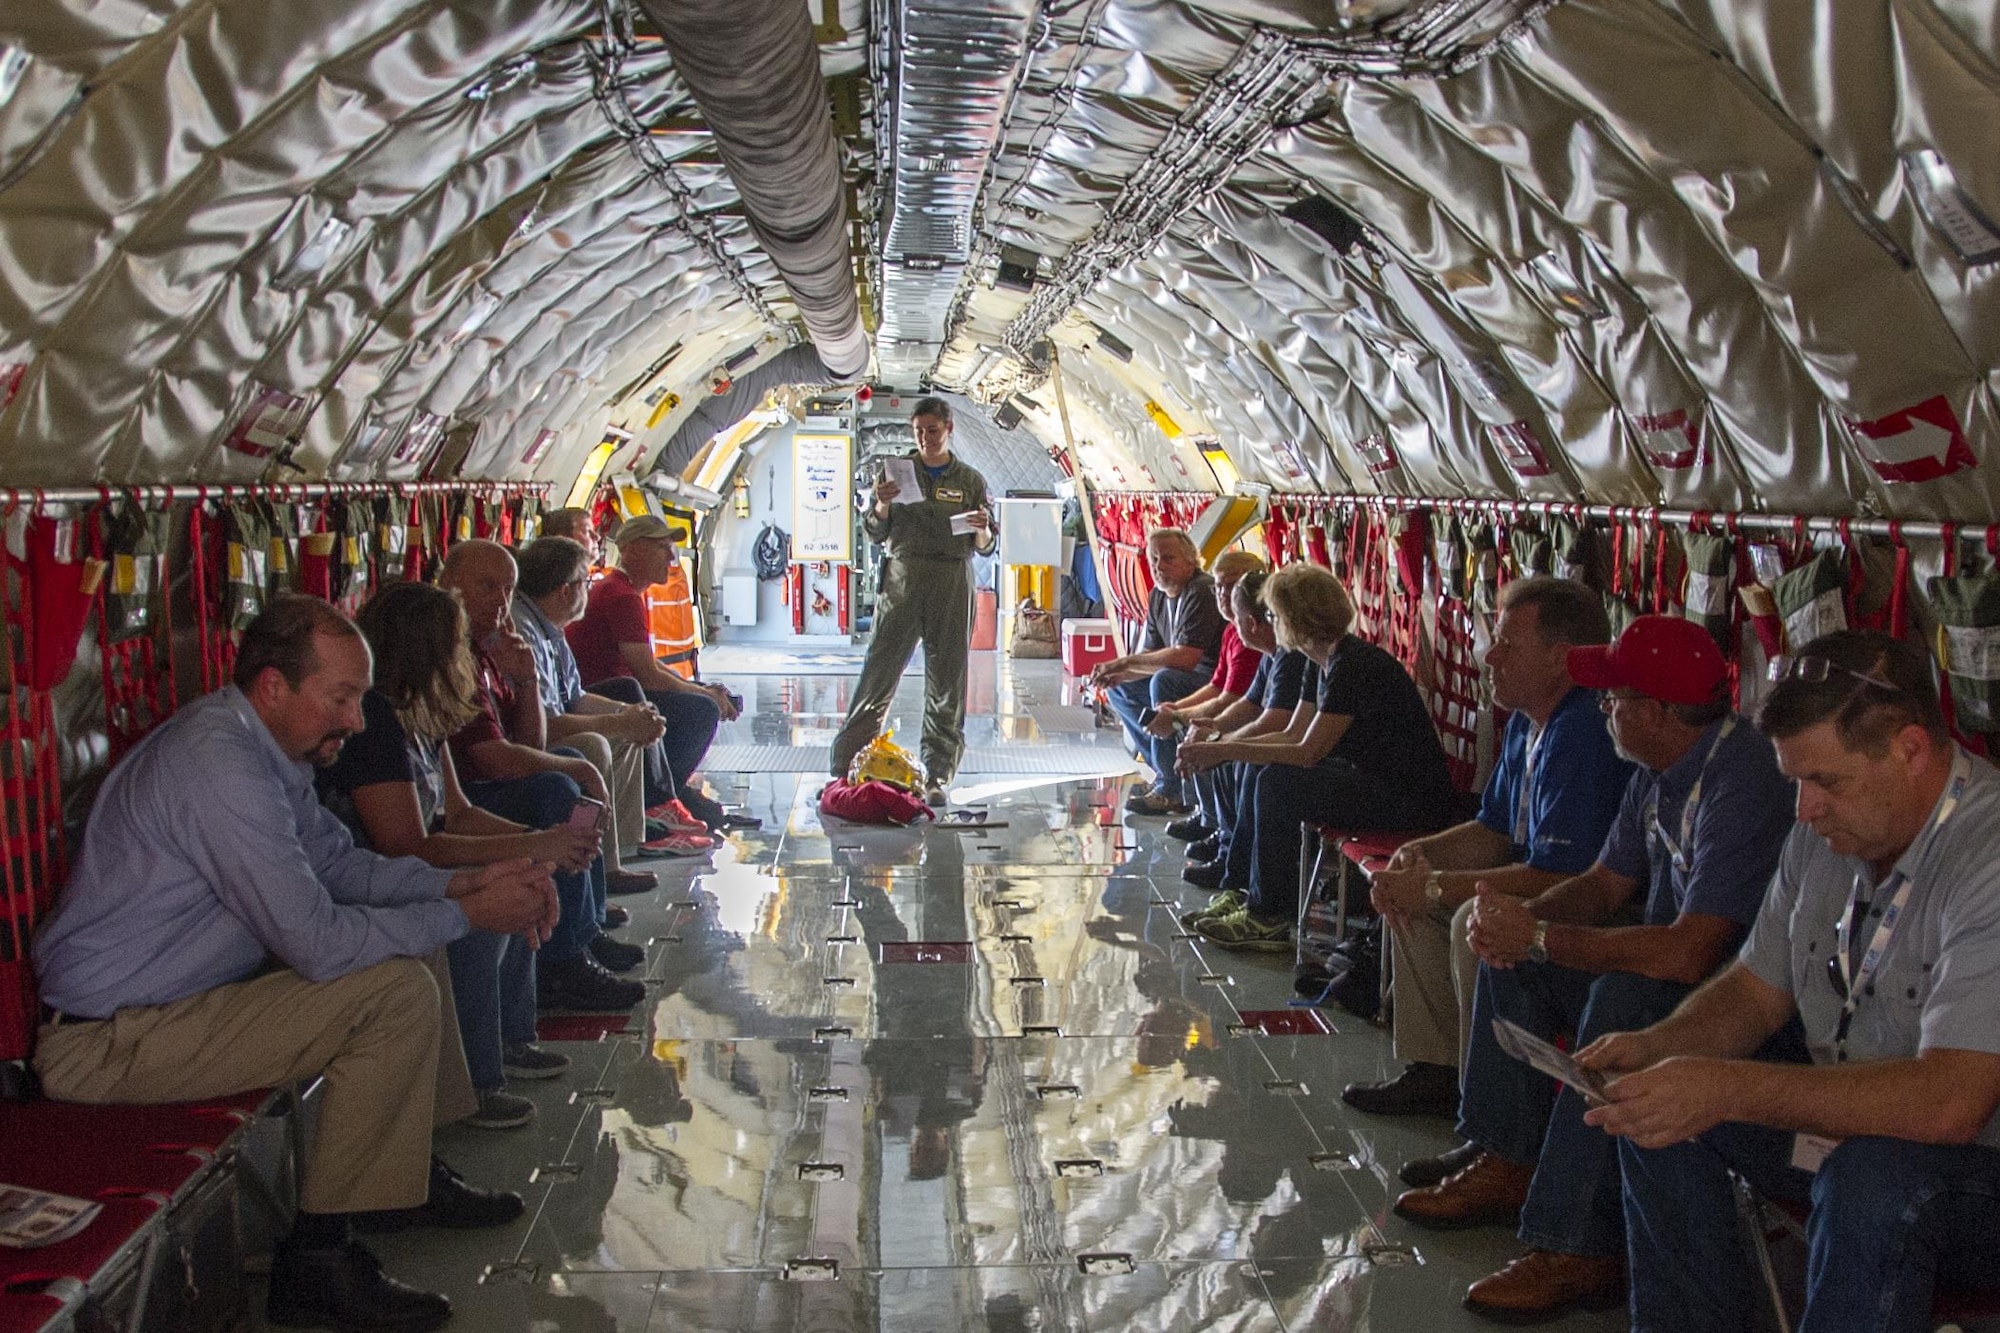 Tech. Sgt. Courtney Storey, 72nd Air Refueling Squadron inflight refueling technician, conducts roll-call during an Indiana Employer Support of the Guard and Reserve event at Grissom Air Reserve Base, Ind., Aug. 19, 2016. More than 40 people, nominated by Guard and Reserve members from the 434th ARW, the 122th Fighter Wing in Fort Wayne, Ind., and the 181st Intelligence Wing in Terre Haute Ind., had an opportunity to learn about the 434th ARW’s operational capabilities during a Bosslift. (U.S. Air Force photo/Staff Sgt. Katrina Heikkinen) 